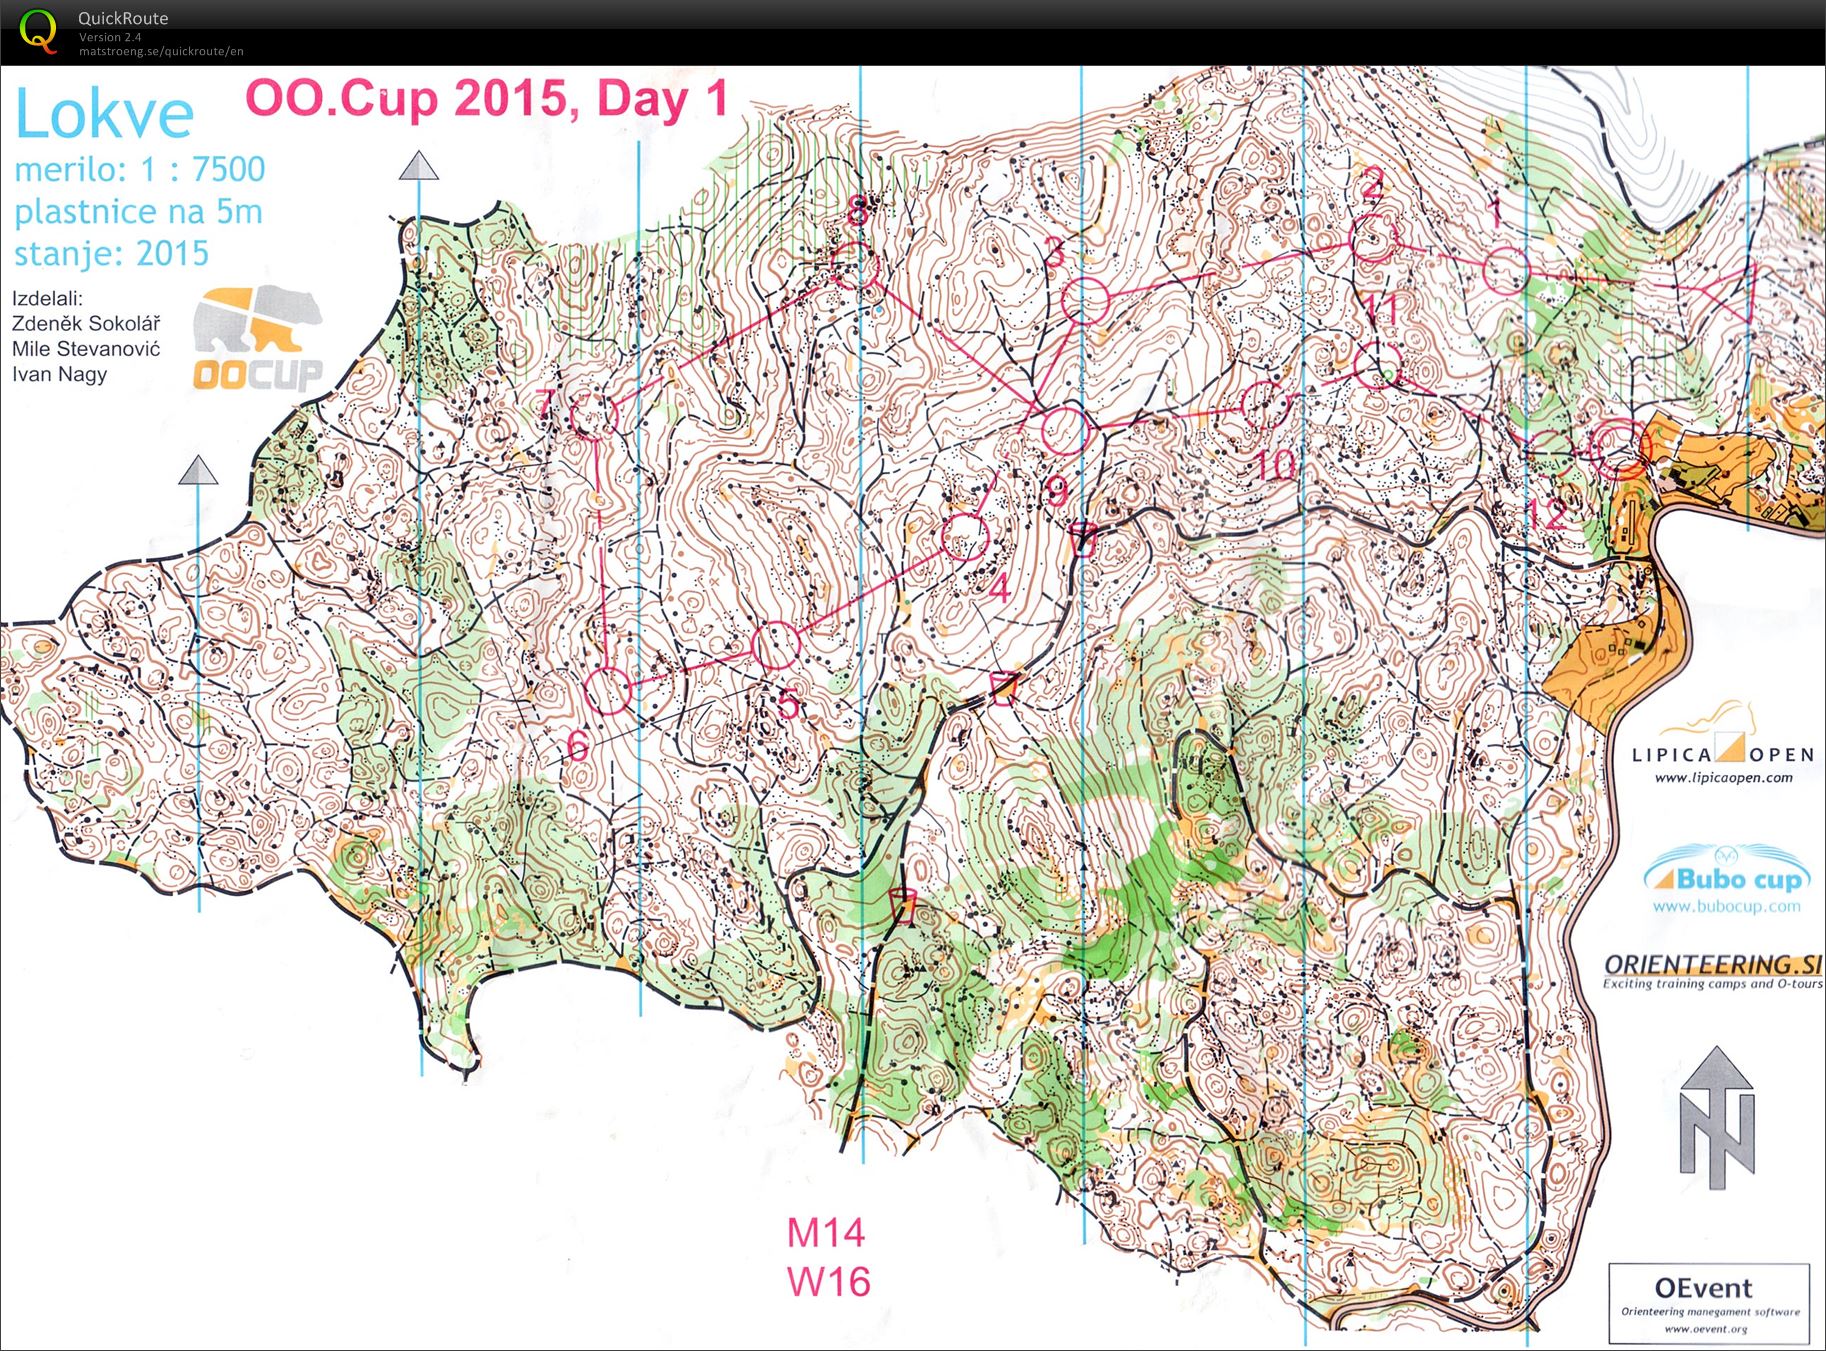 OOCup Day 1 (2015-07-25)